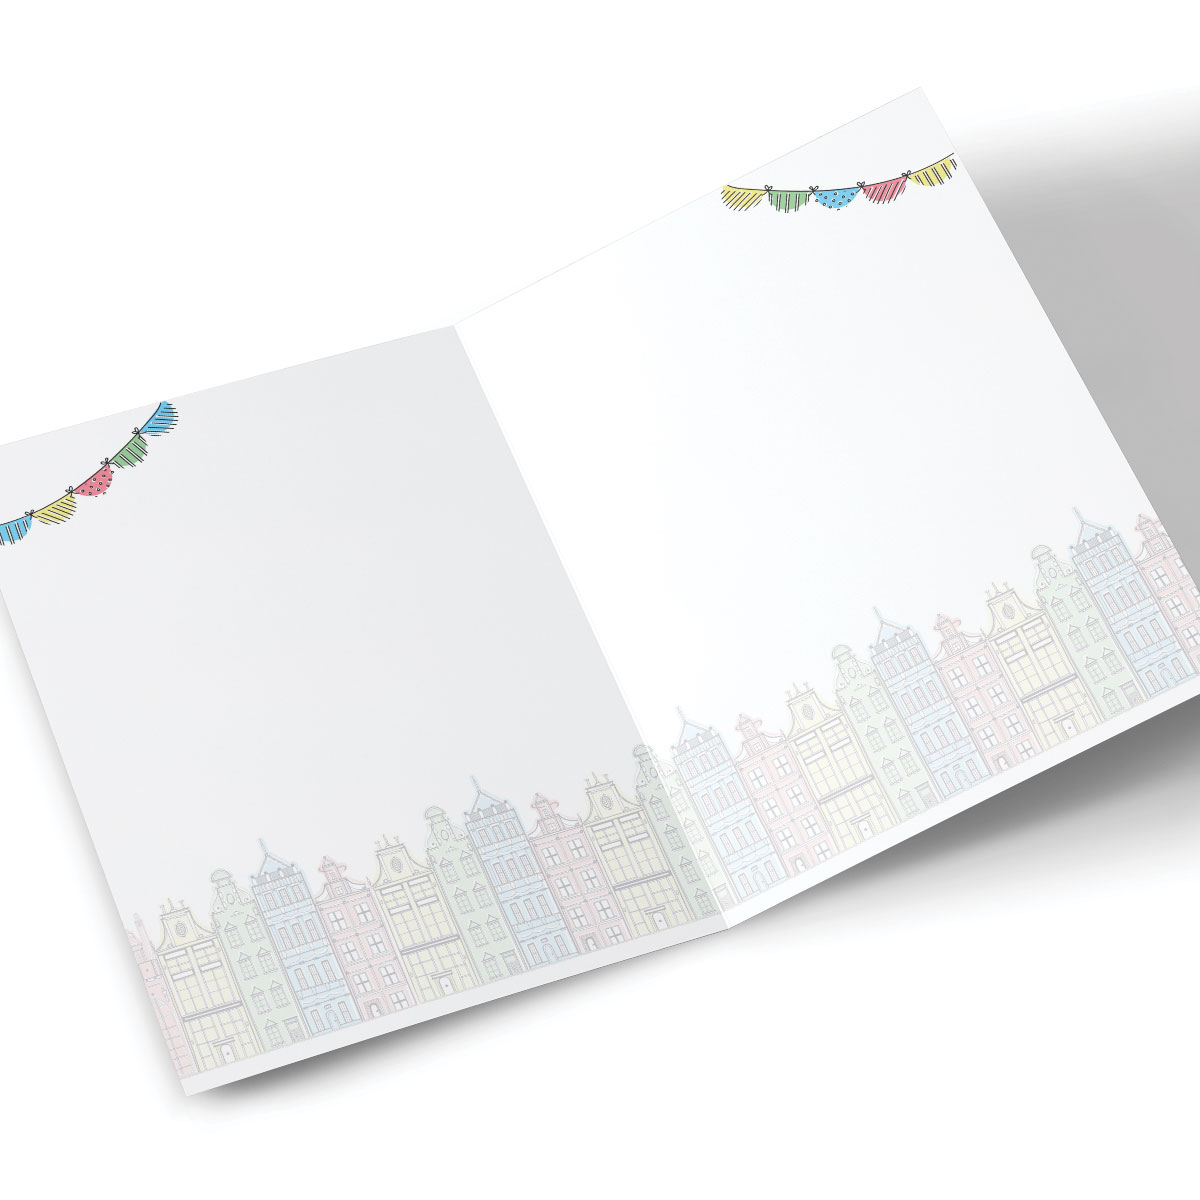 Personalised New Home Card - Colourful Town Houses